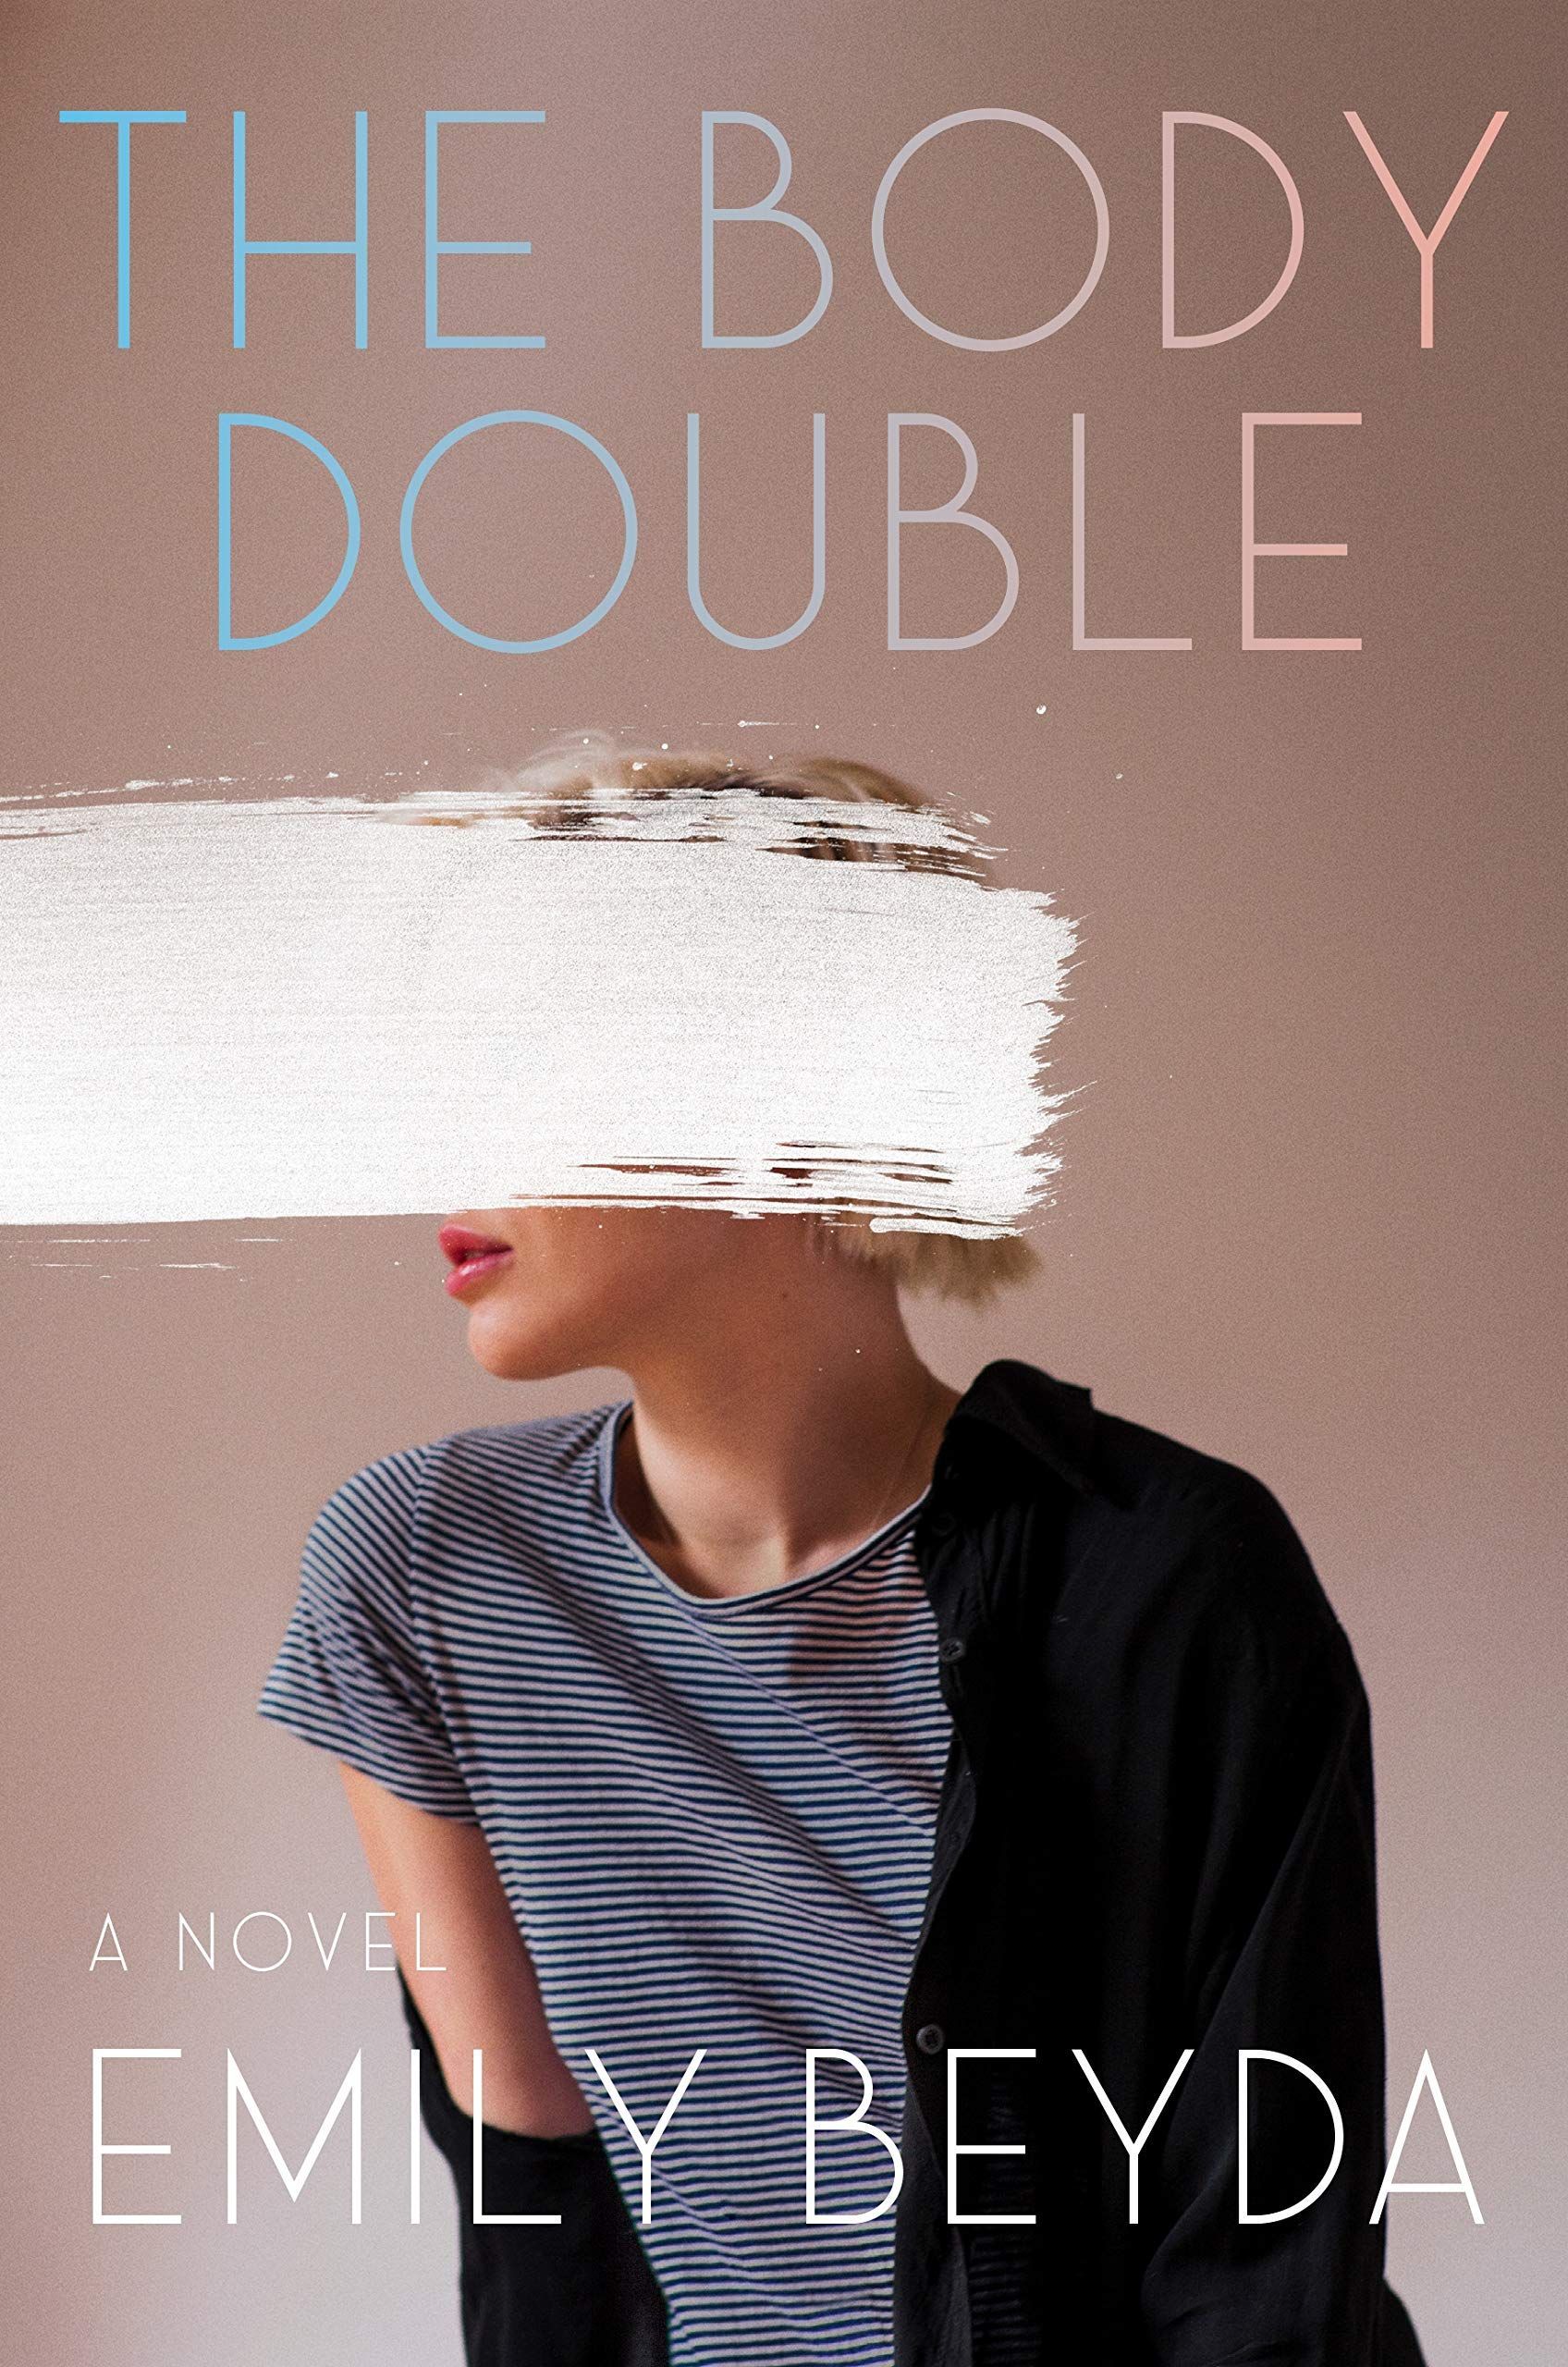 Convincing Fake: On Emily Beyda’s “The Body Double”